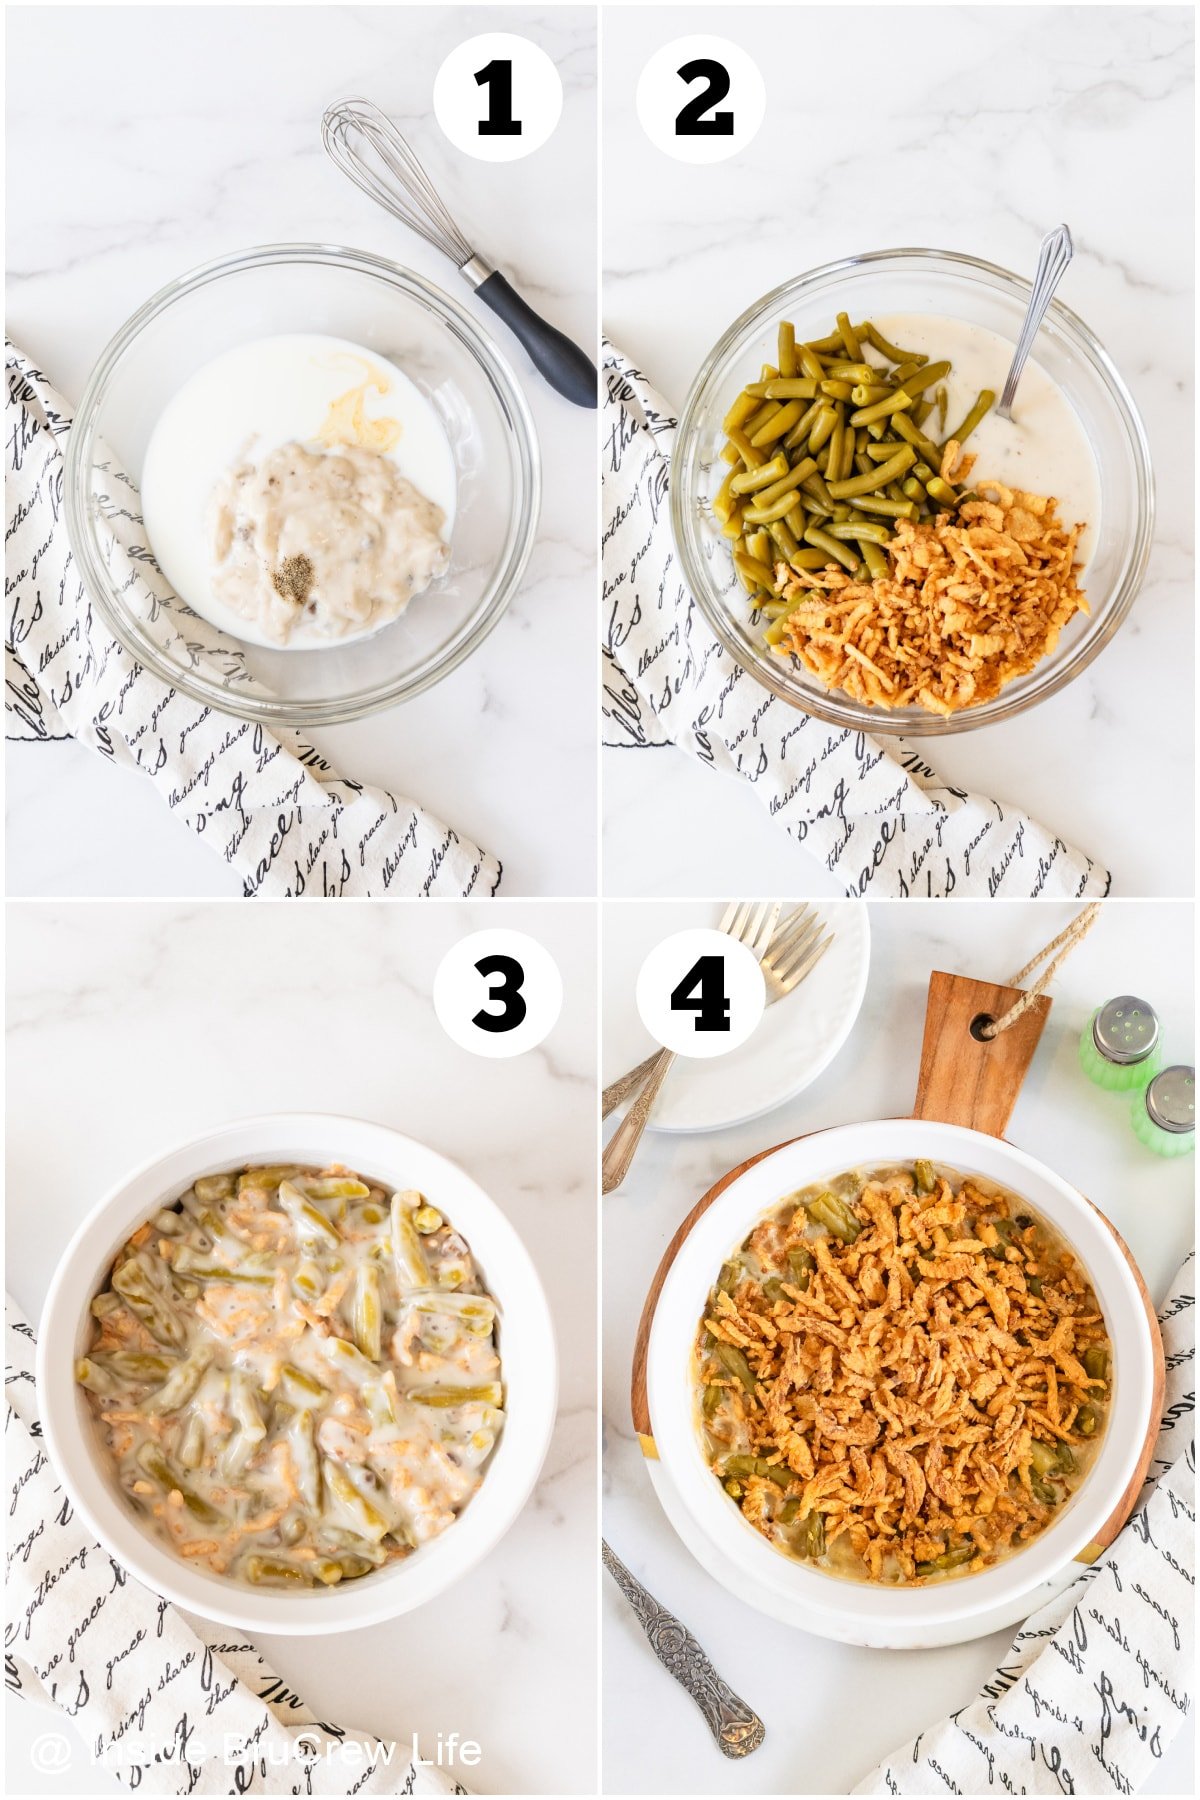 Four pictures collaged together showing how to assemble a green bean bake.